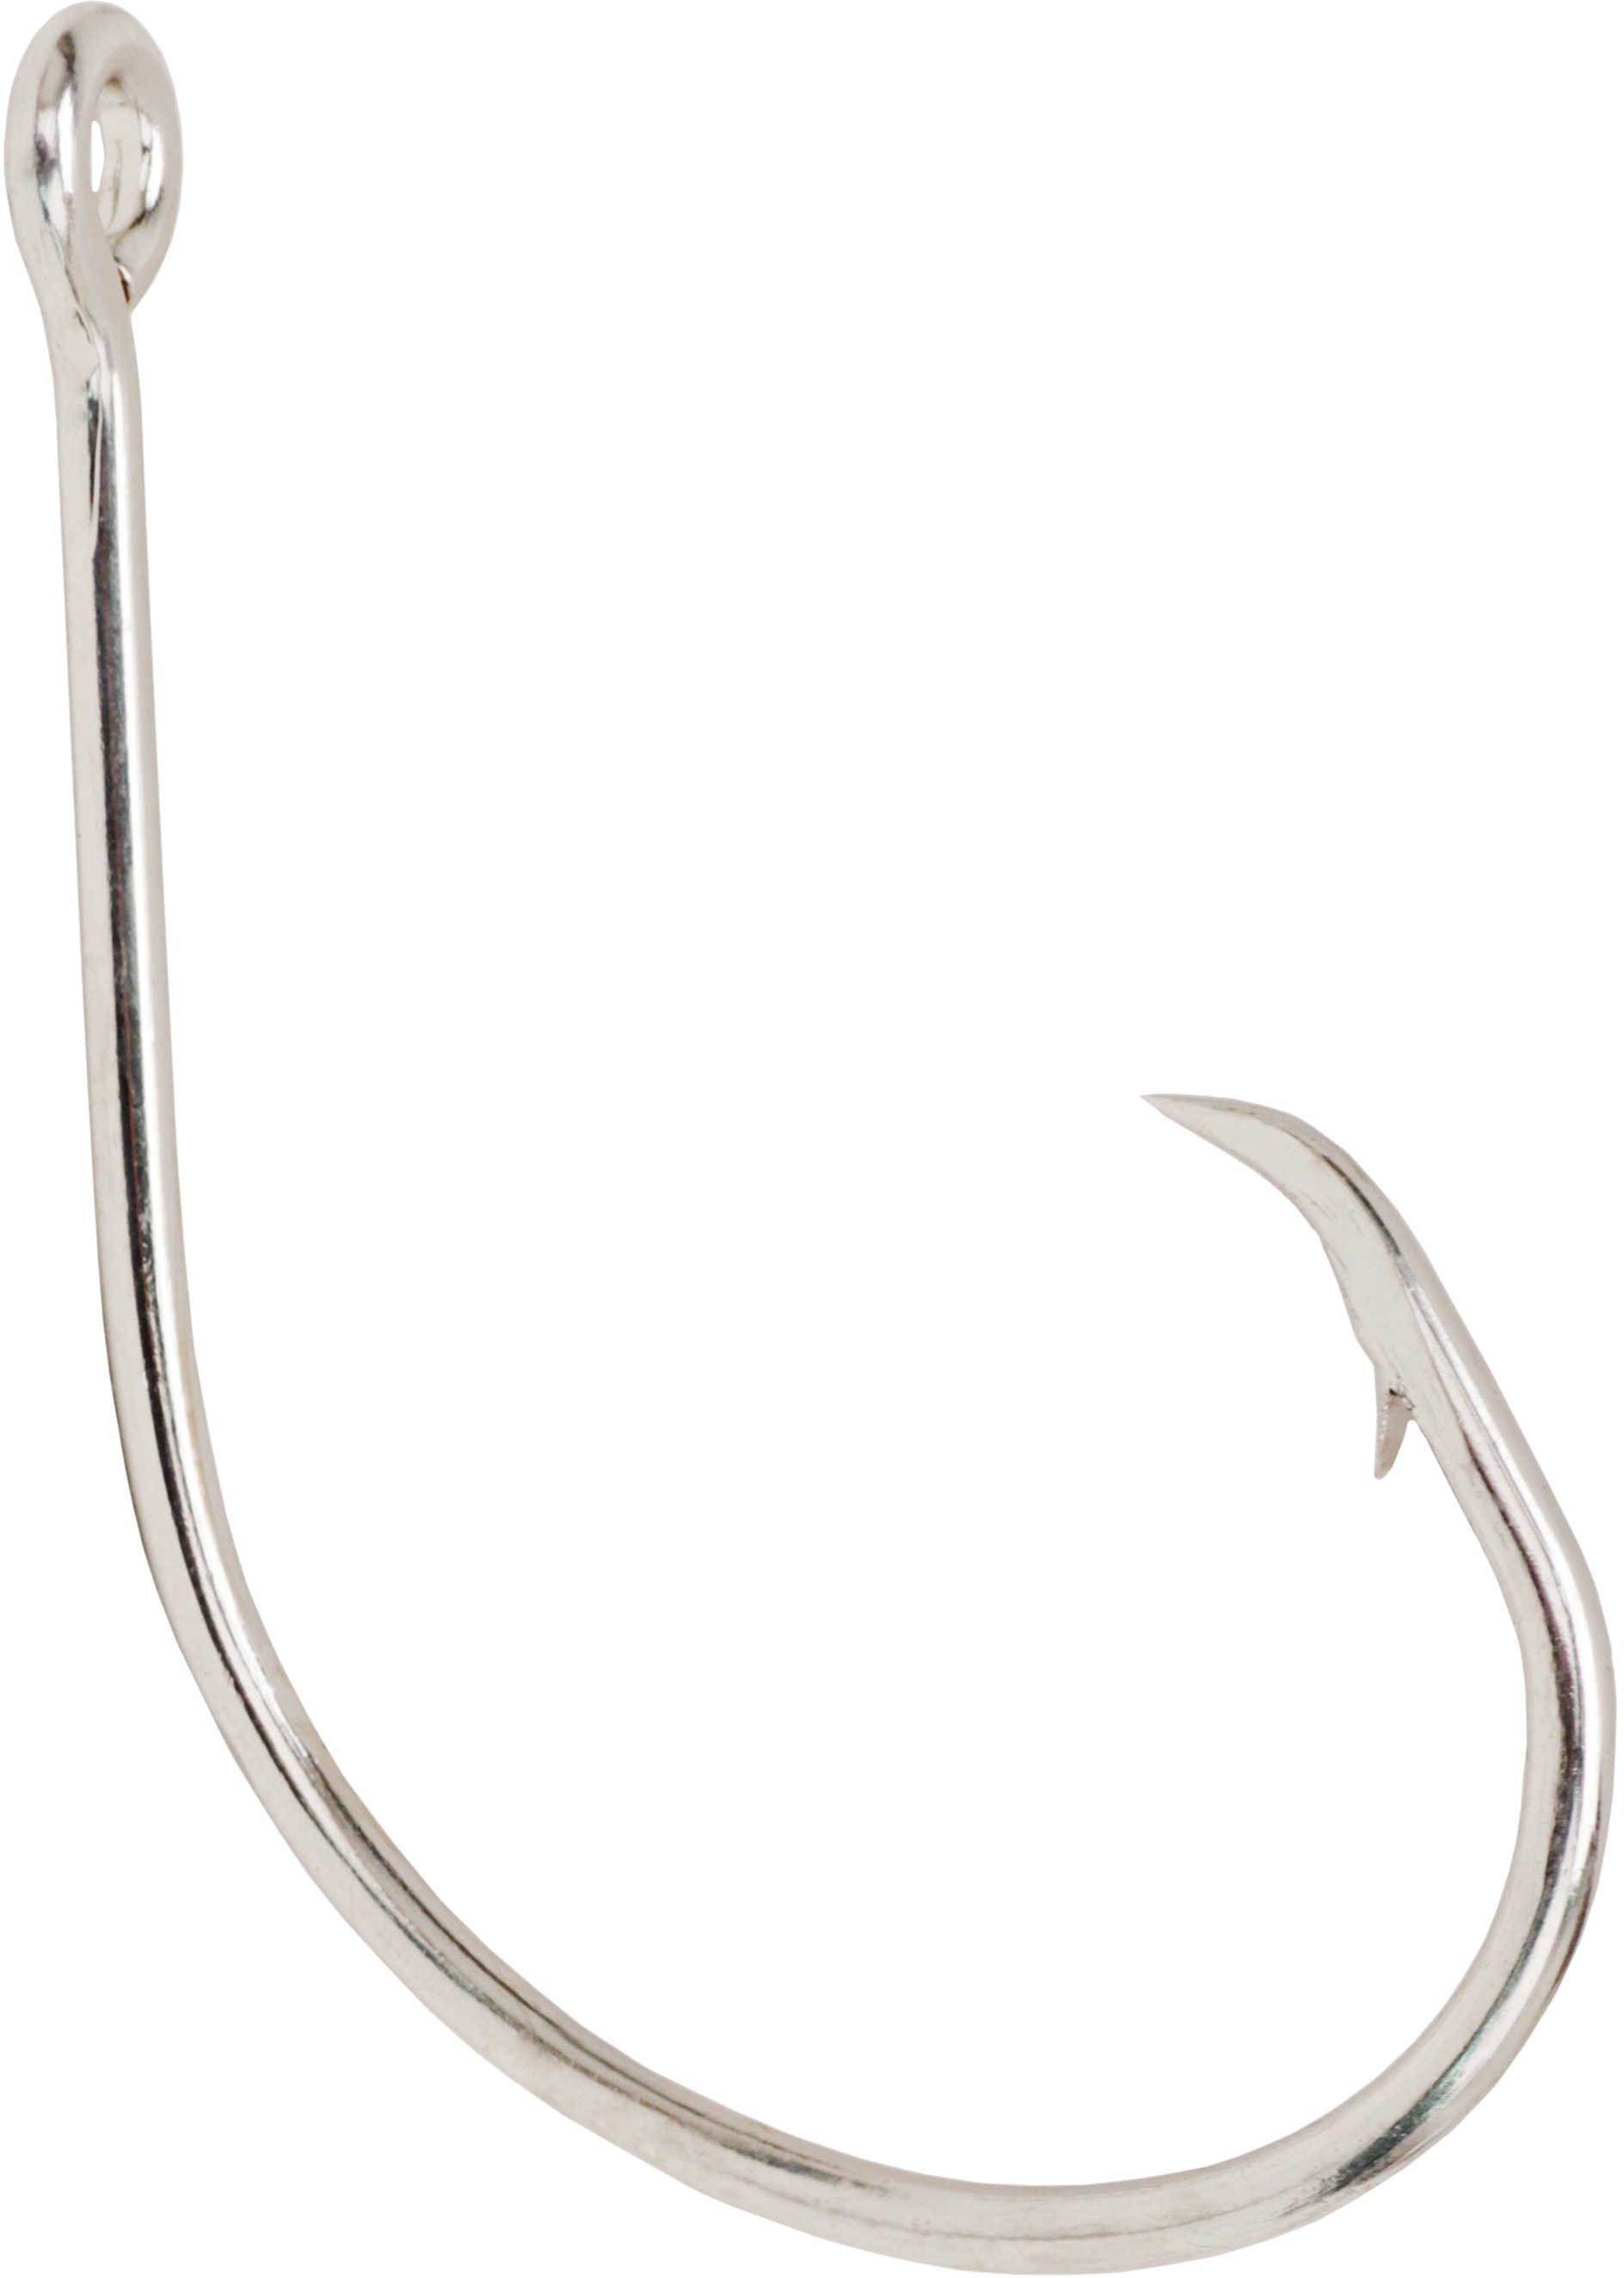 Eagle Claw Fishing Tackle Lazer Circle Offset Hook, Seaguard Size 1 (Per 10) Md: L197GH-1